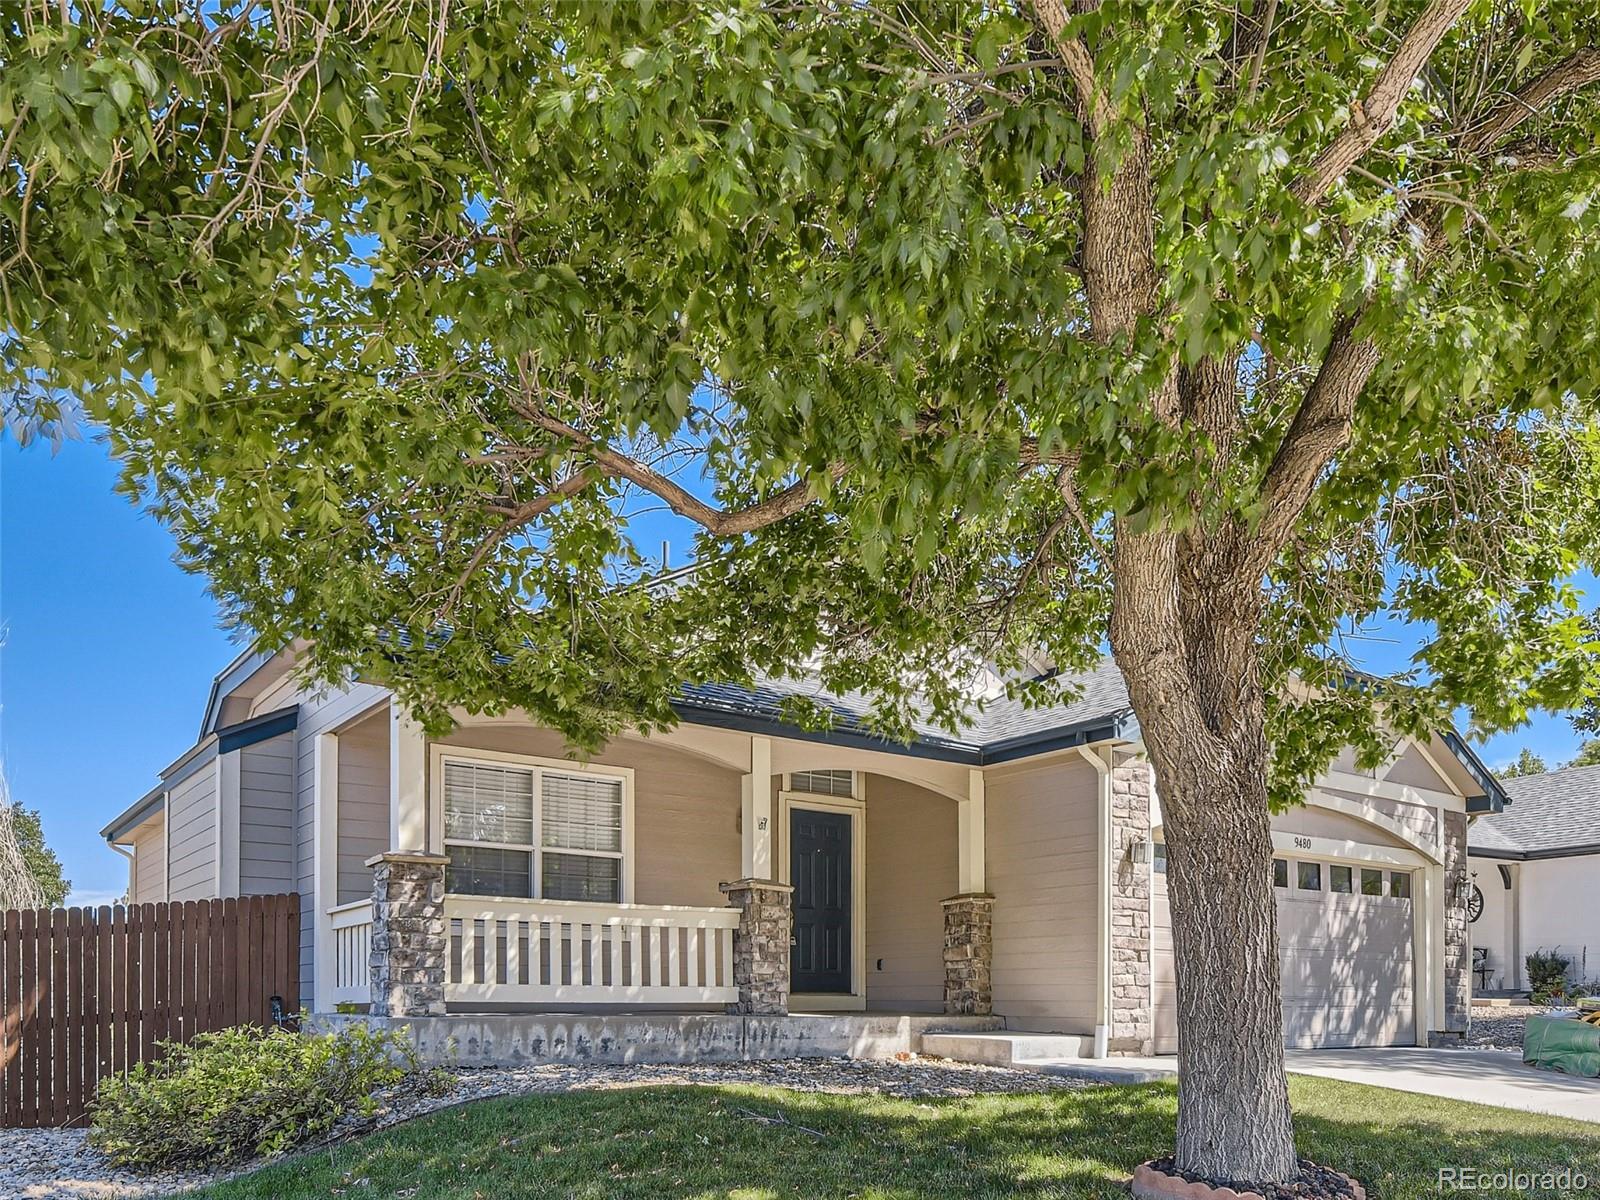 9480  troon village drive, Lone Tree sold home. Closed on 2023-11-14 for $599,000.